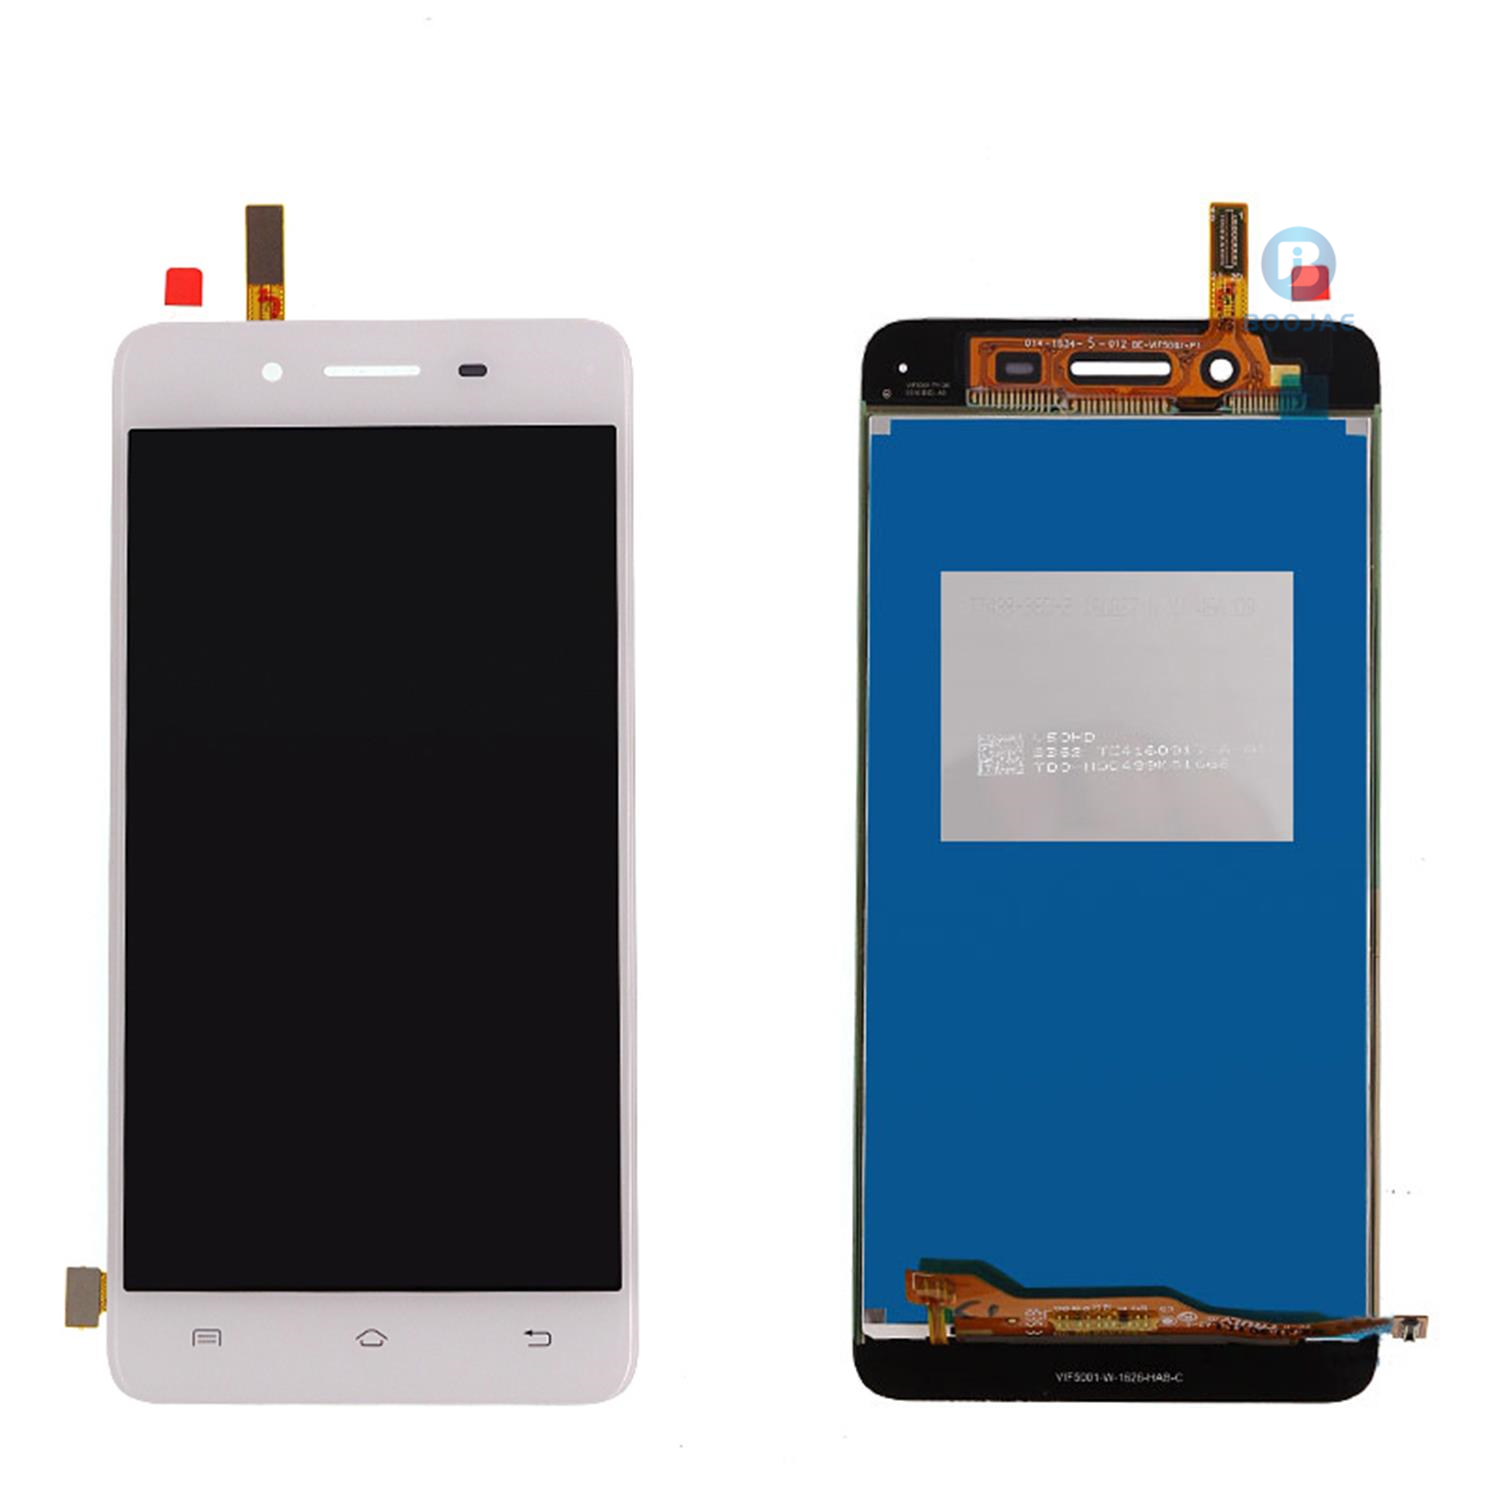 For Vivo V3 Max LCD Screen Display and Touch Panel Digitizer Assembly Replacement